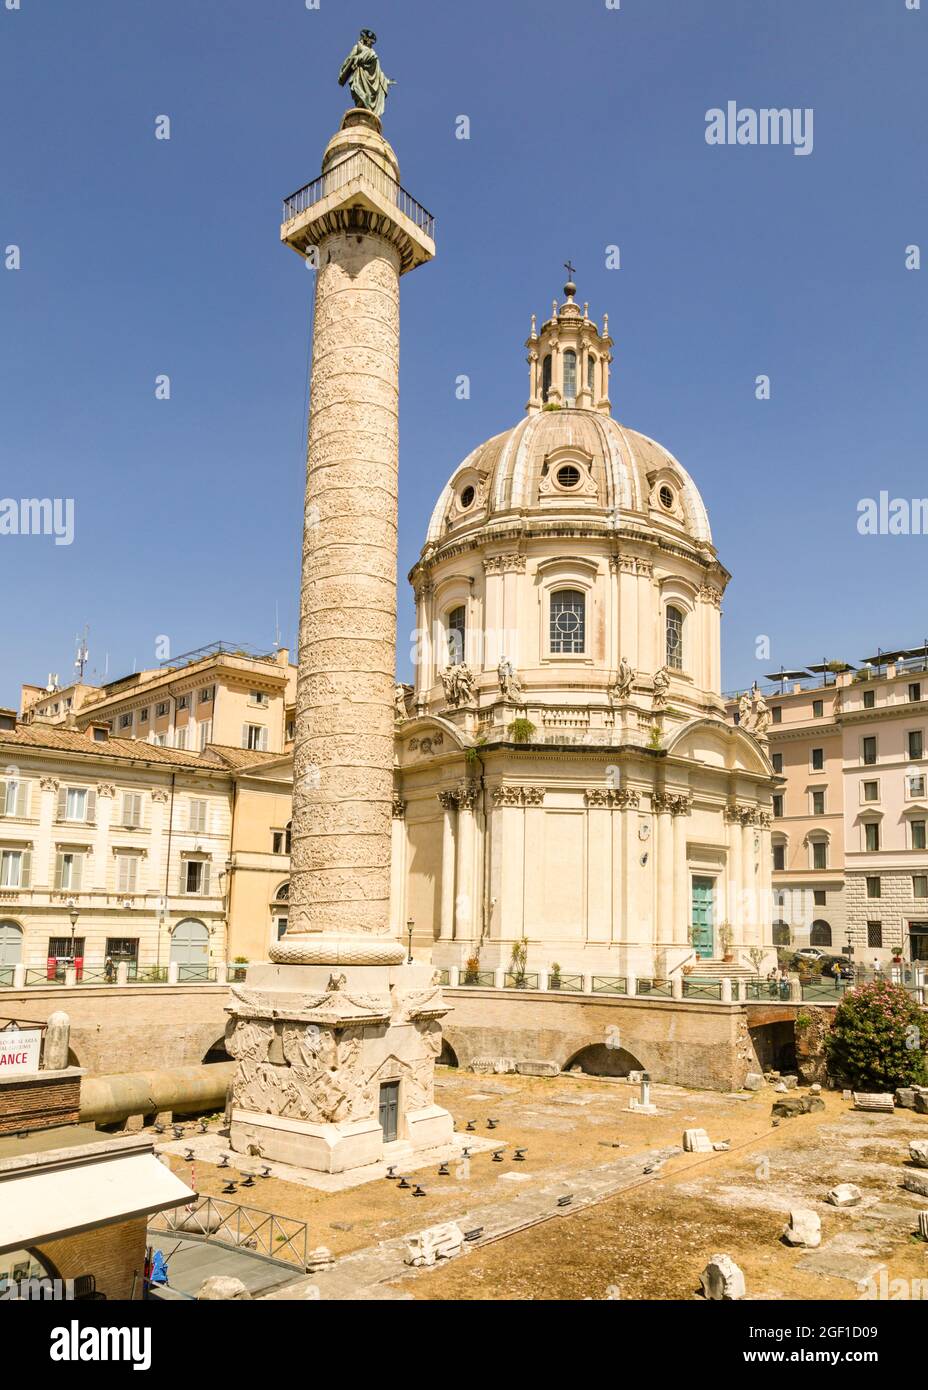 Trajan's Column, with The Church of the Most Holy Name of Mary in the background, Rome, Italy Stock Photo